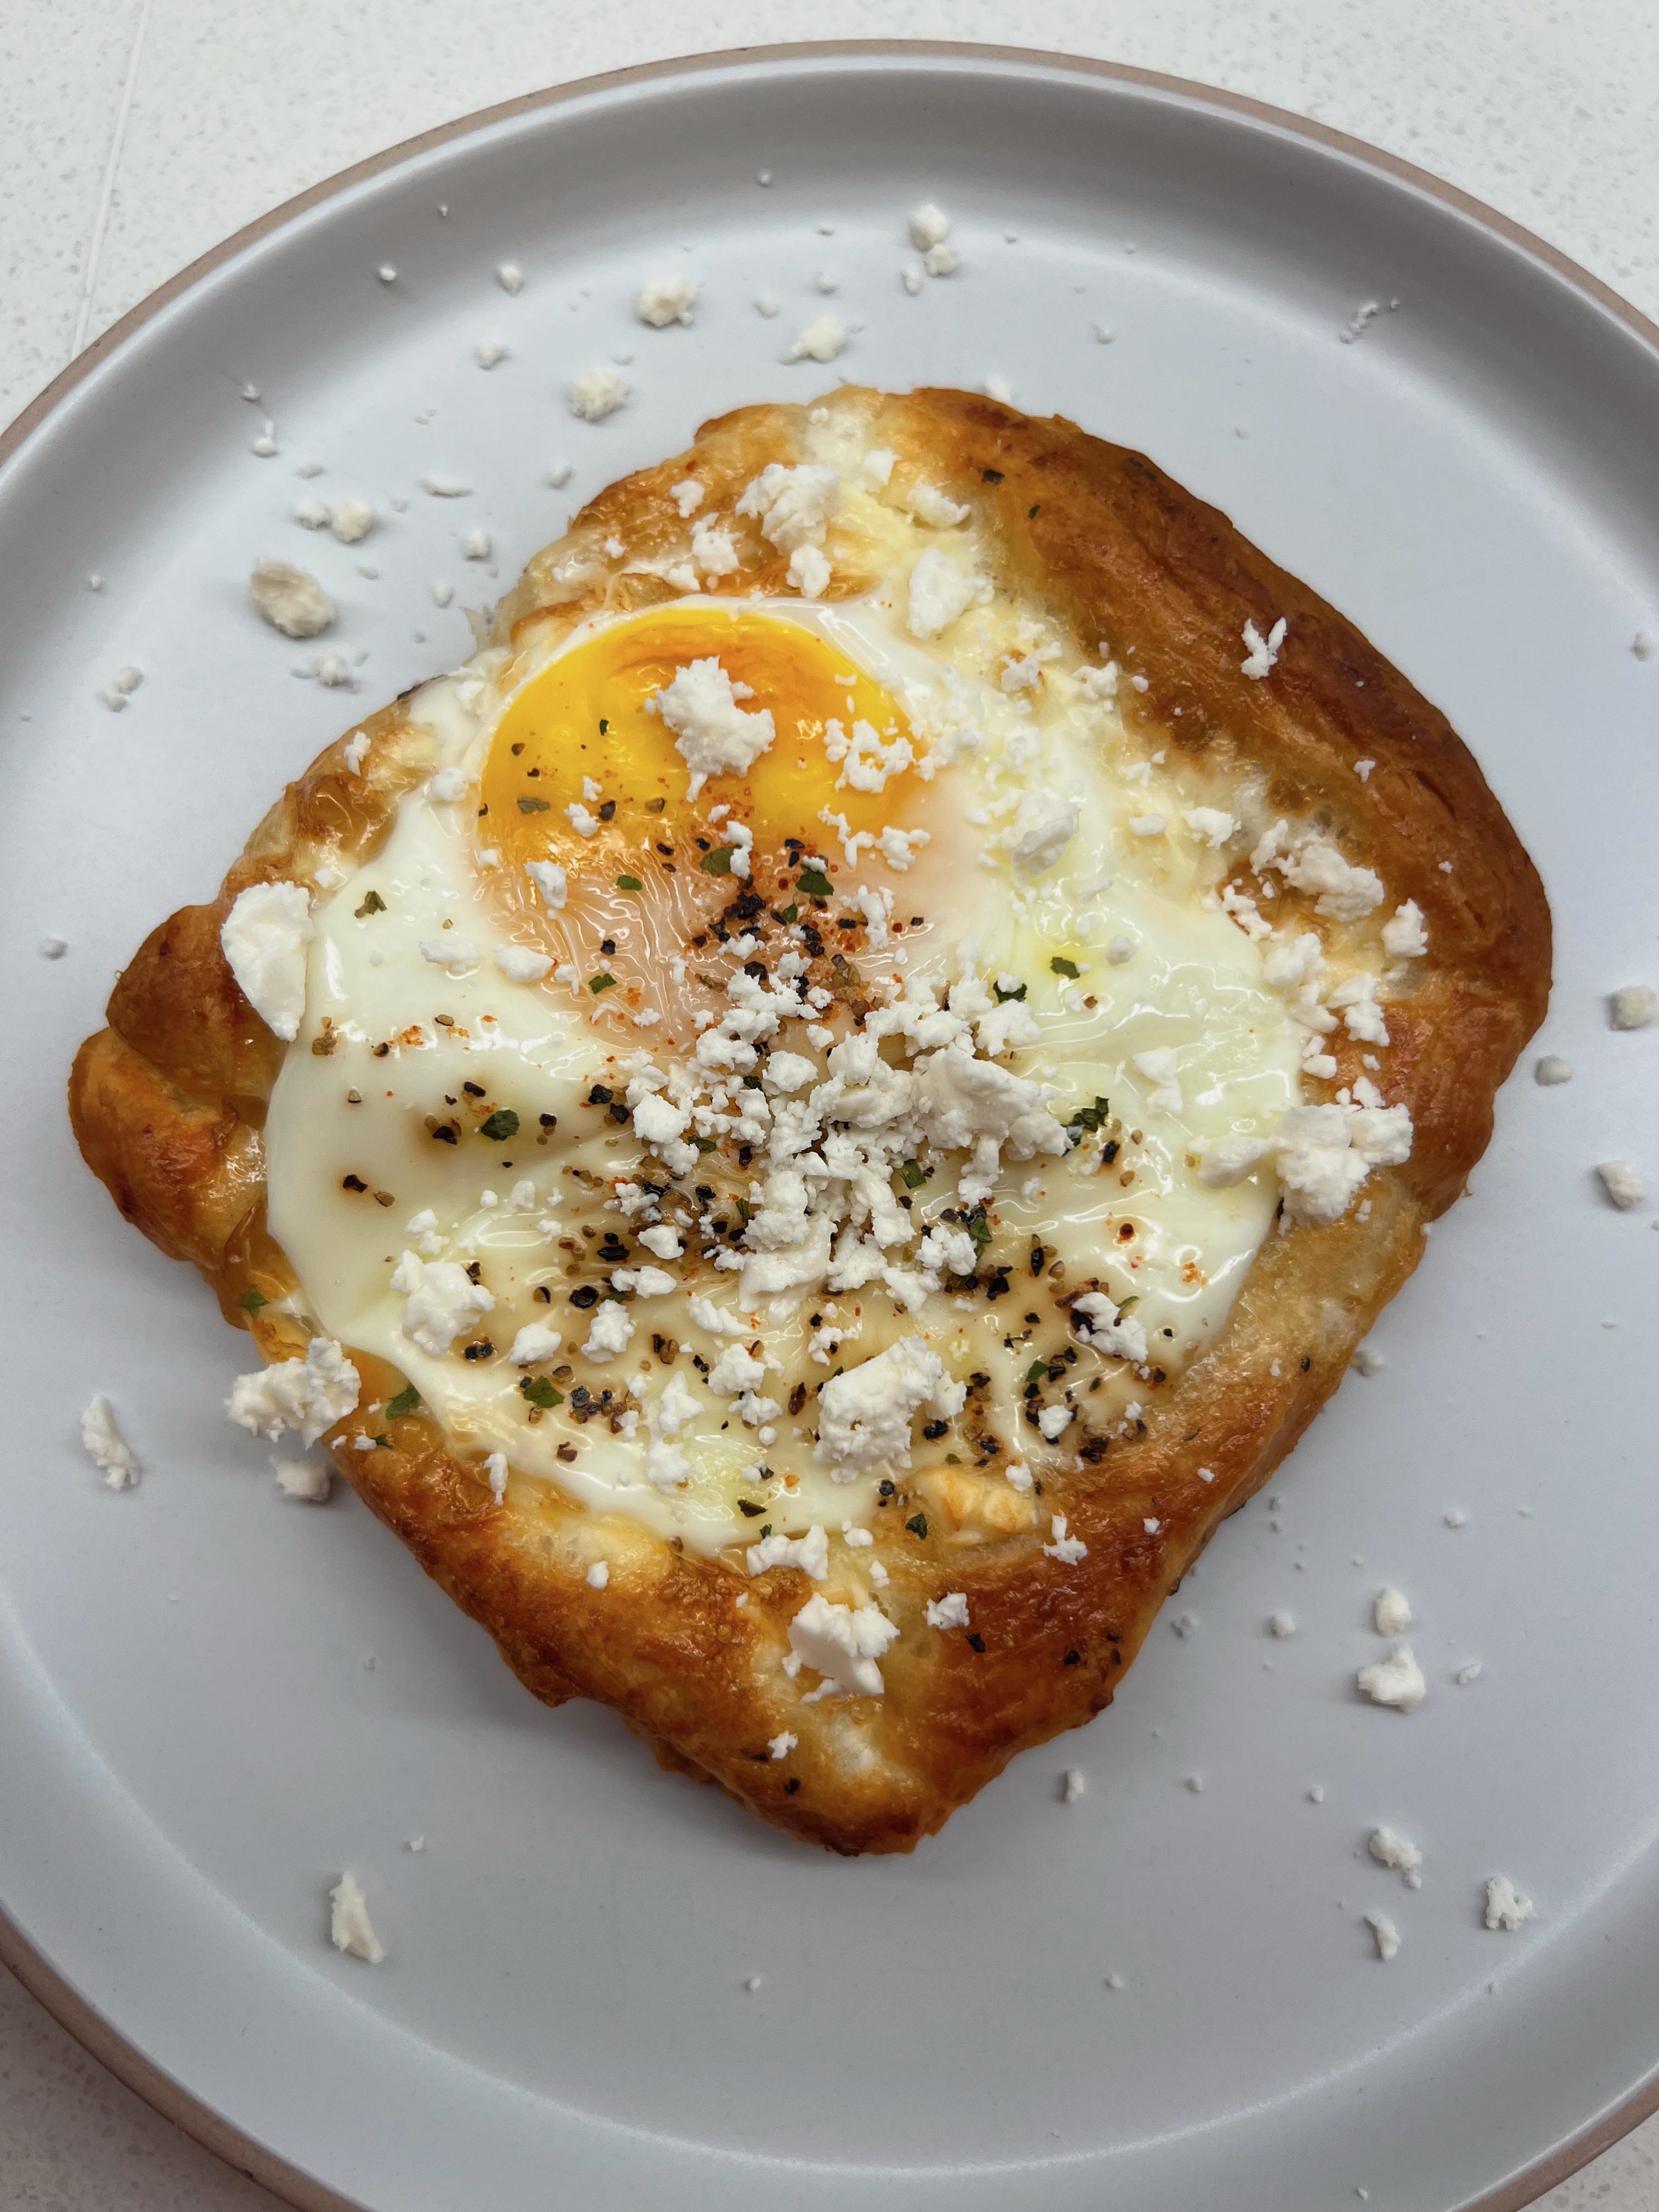 a breakfast pastry with a fried and feta